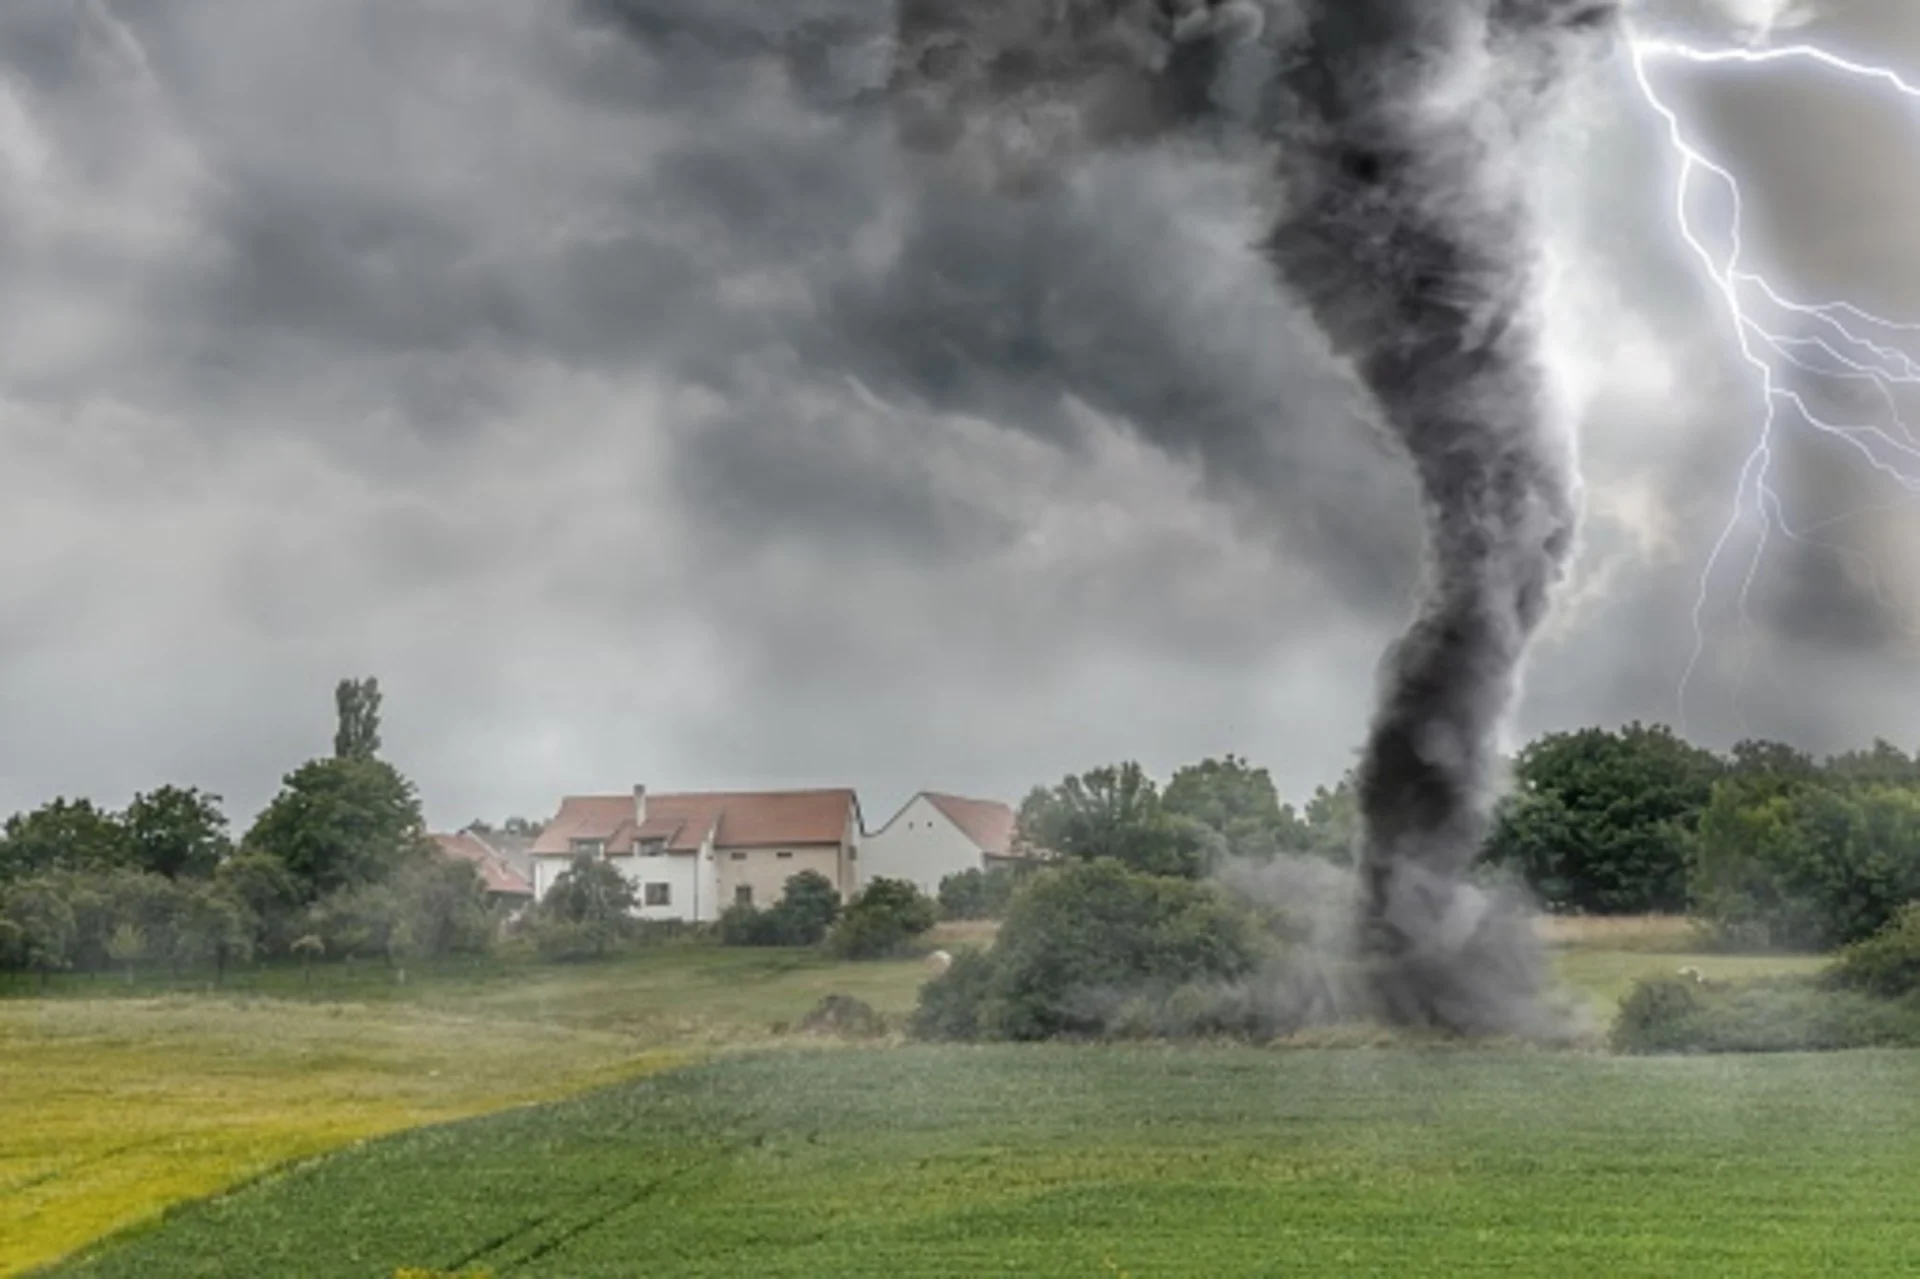 Why people ignore severe weather warnings (or do they?)